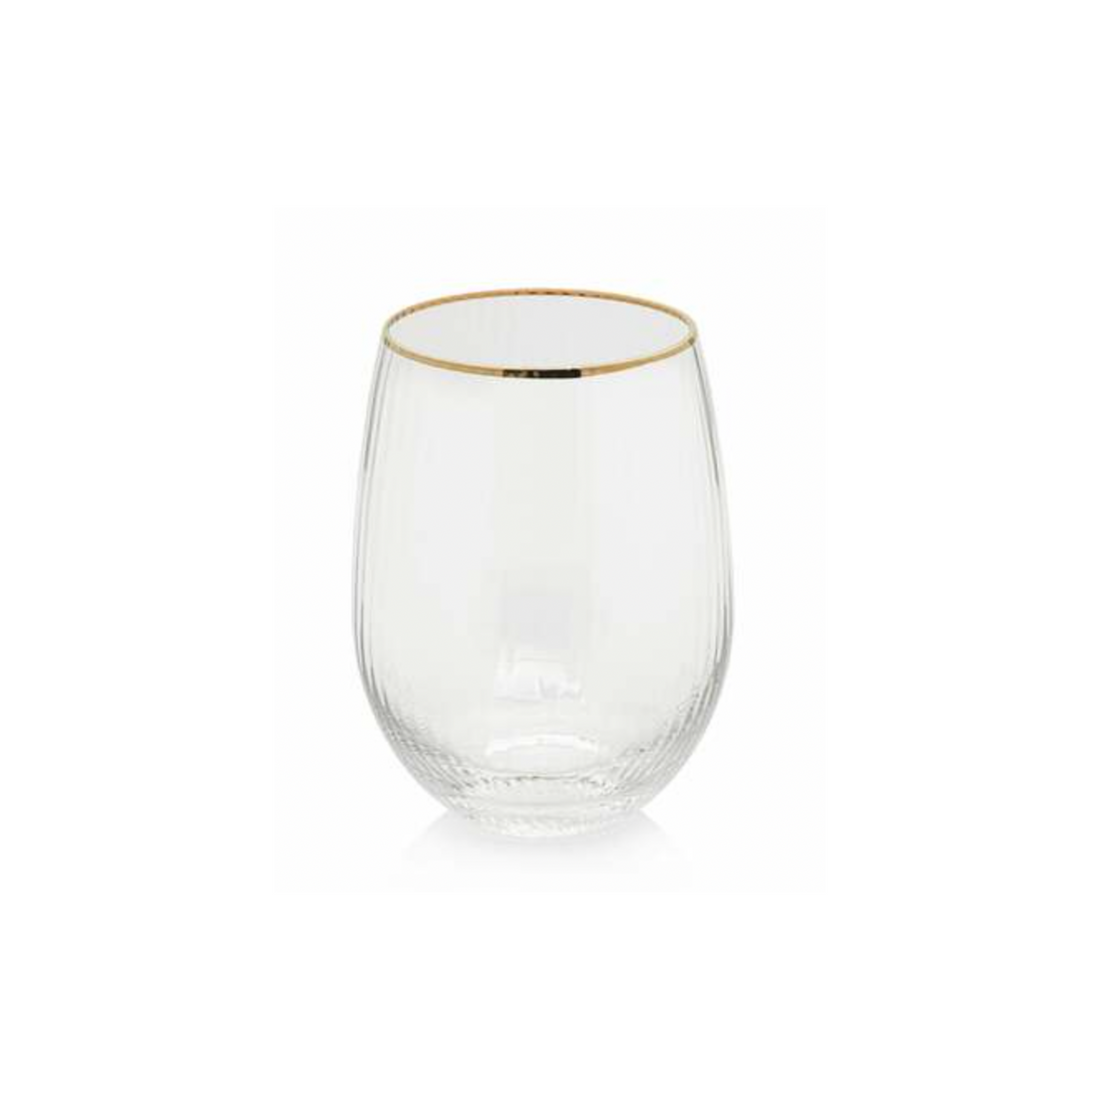 Fluted Gold Rim Stemless Wine Glass